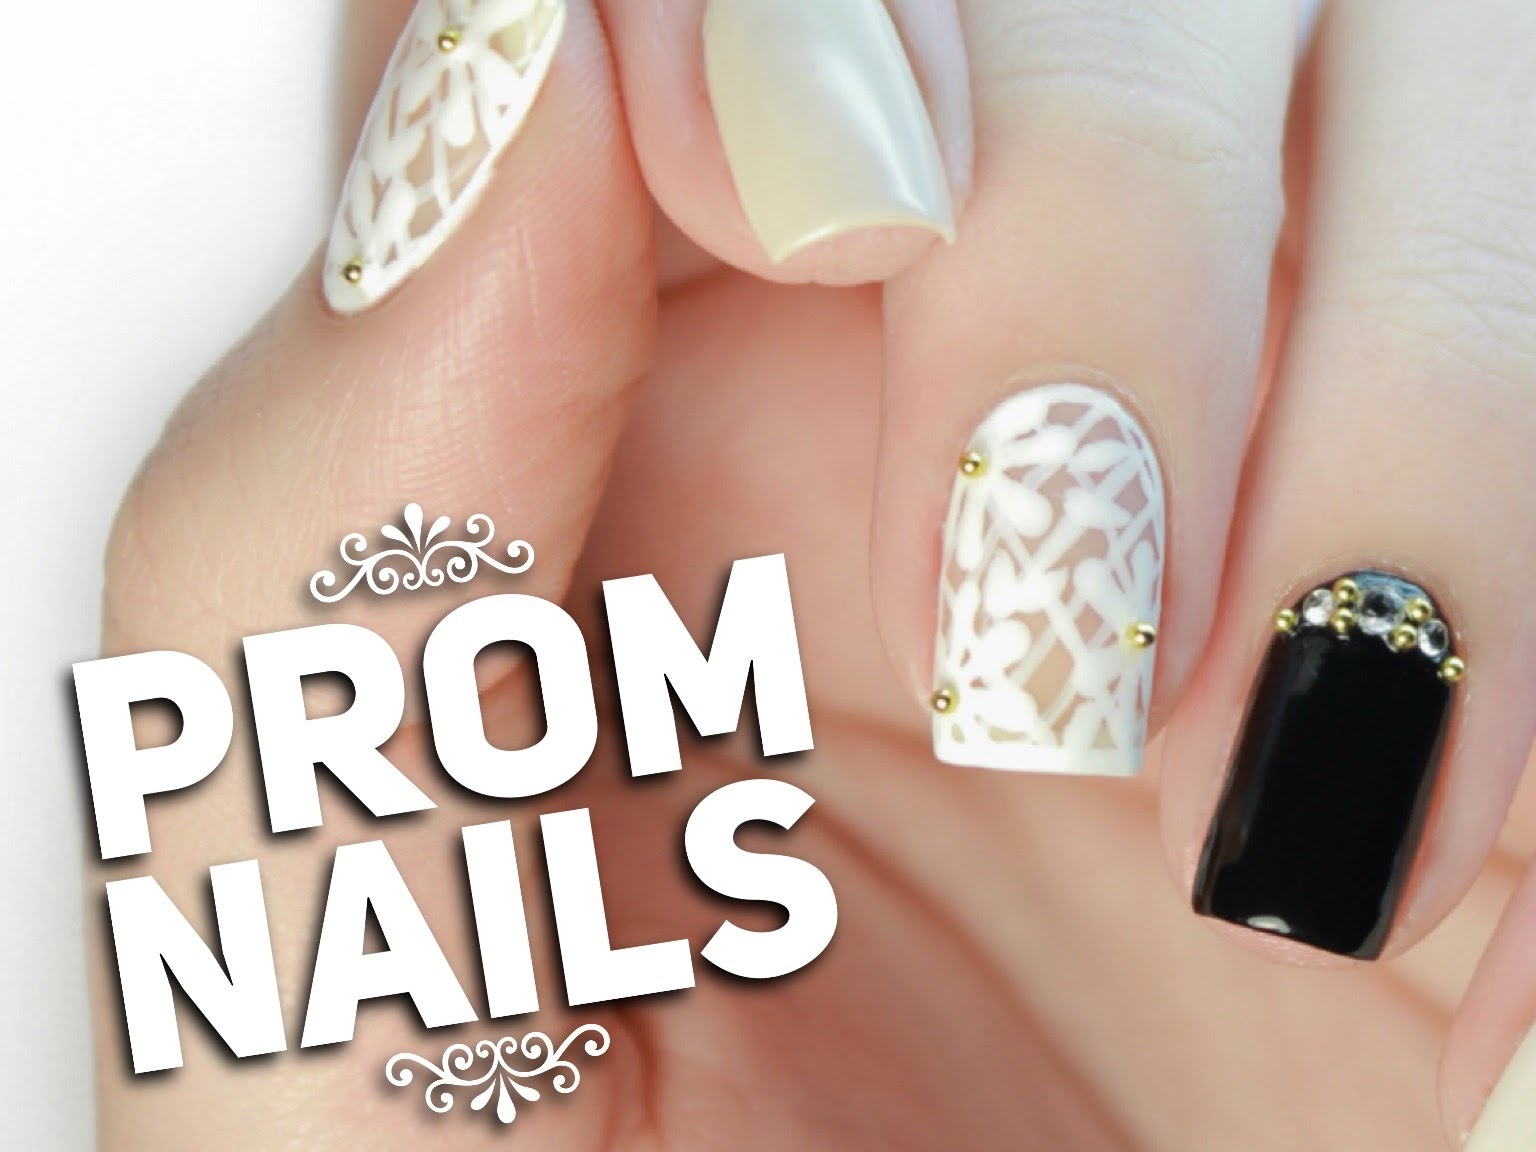 3. "Prom Nail Art Tutorial: Step-by-Step Guide for Perfect Nails" - wide 2